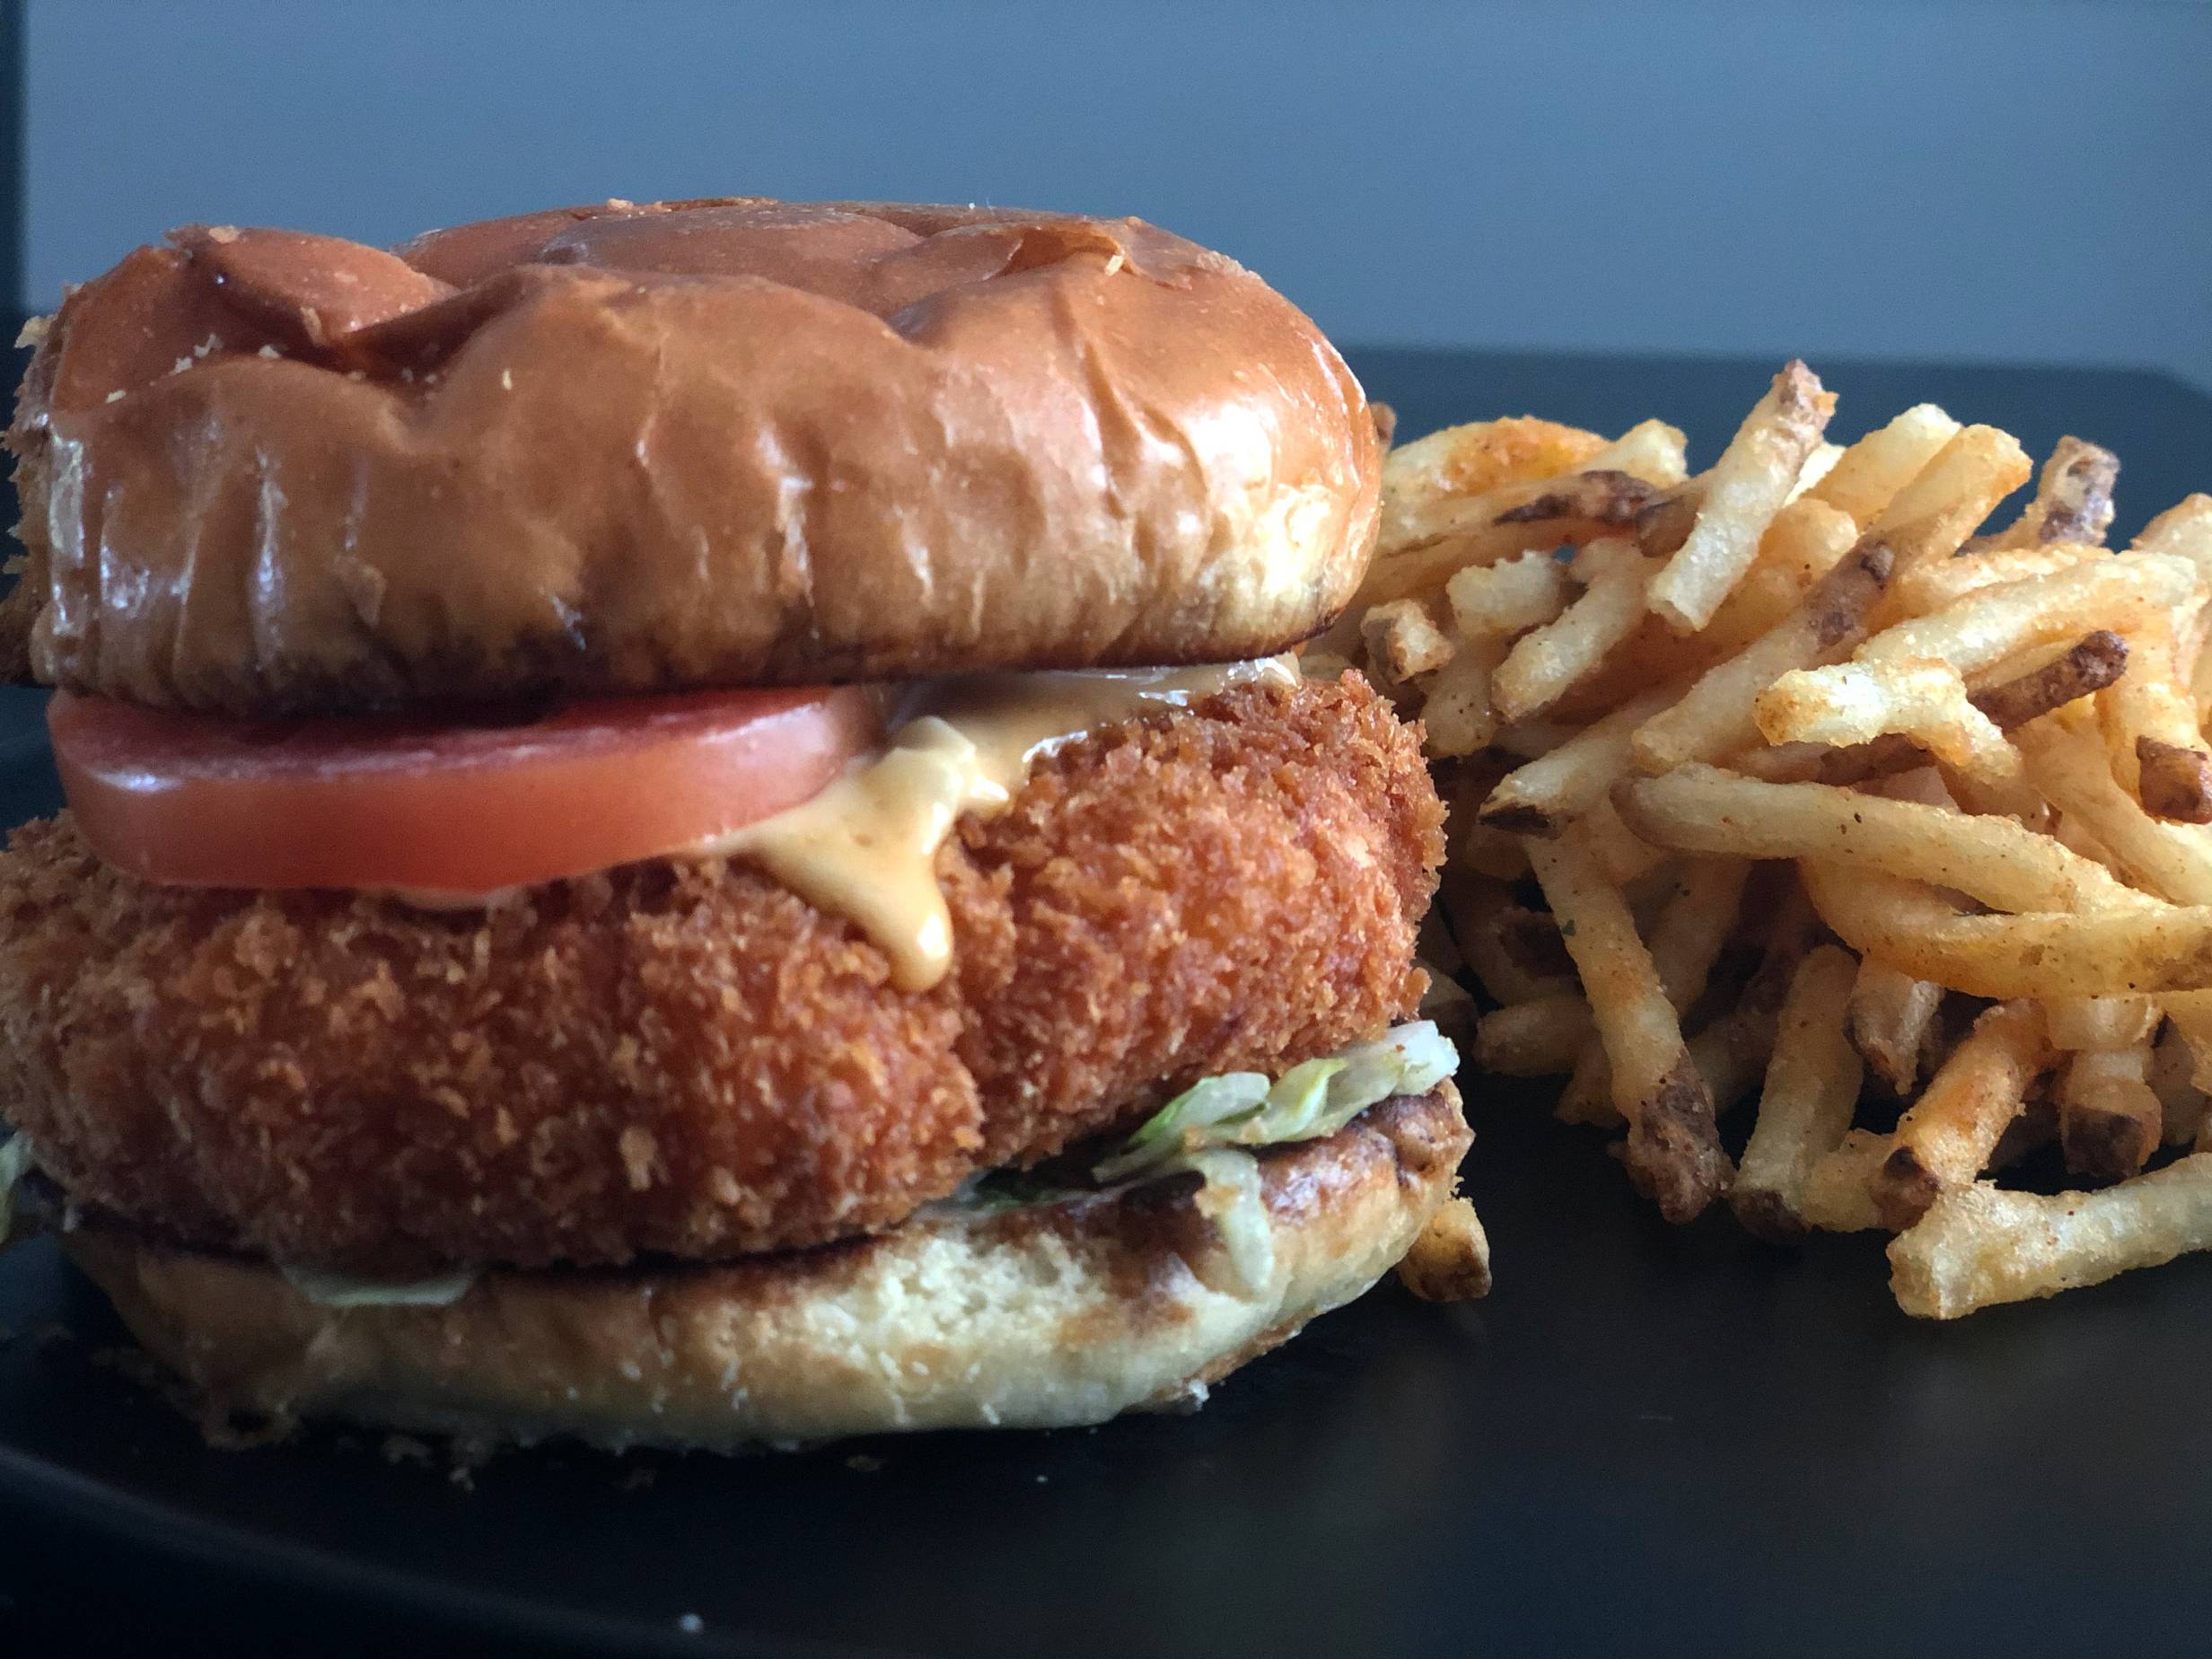 A burger with a crispy shrimp patty is sandwiched between a soft brown bun with tomato slices showing and a bit of lettuce below the patty. The burger sits on a plate next to a large pile of shoestring french fries. Photo by Alyssa Buckley.